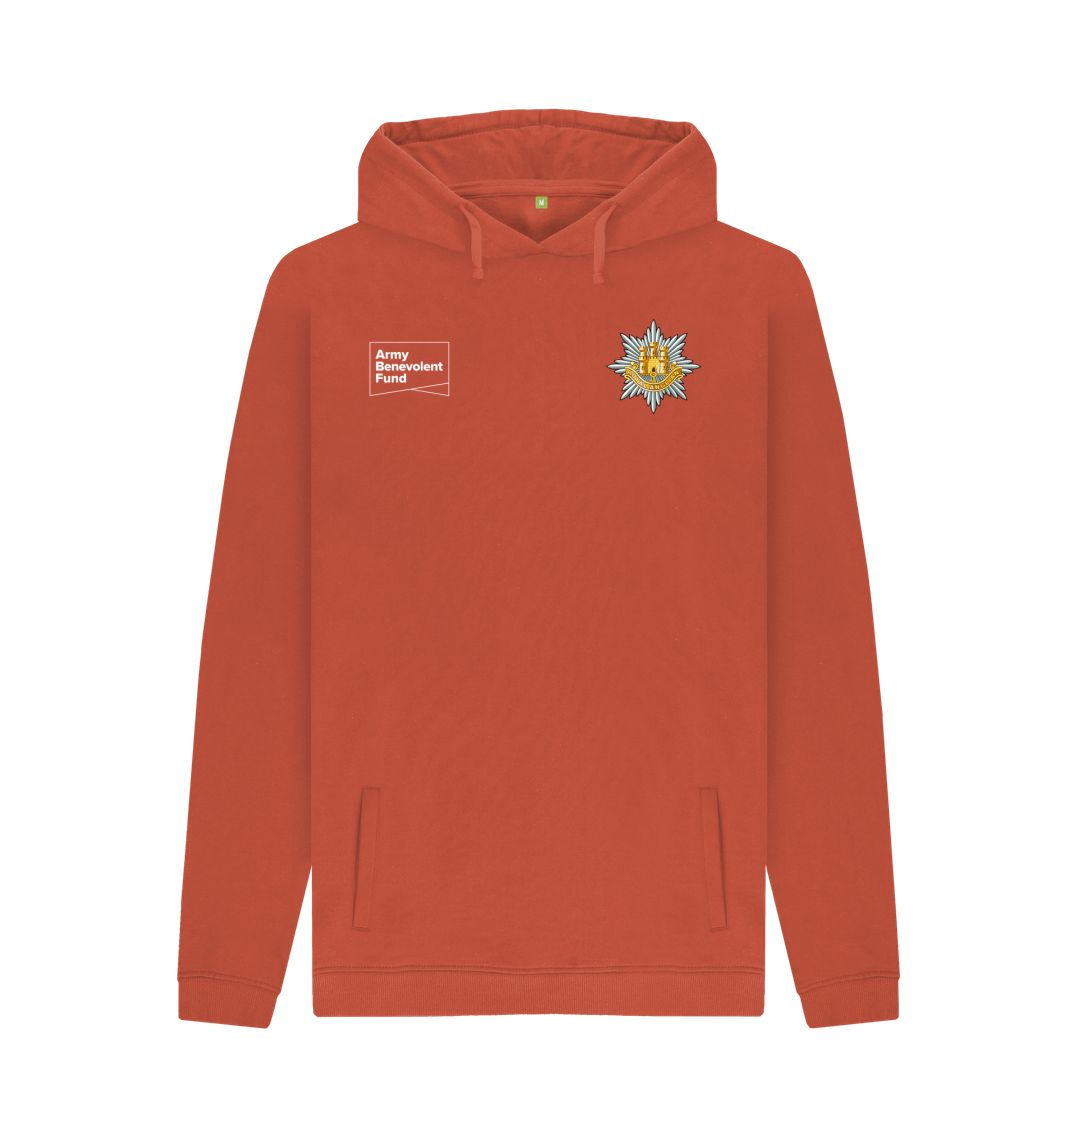 The Royal Anglian Regiment Unisex Hoodie - Army Benevolent Fund